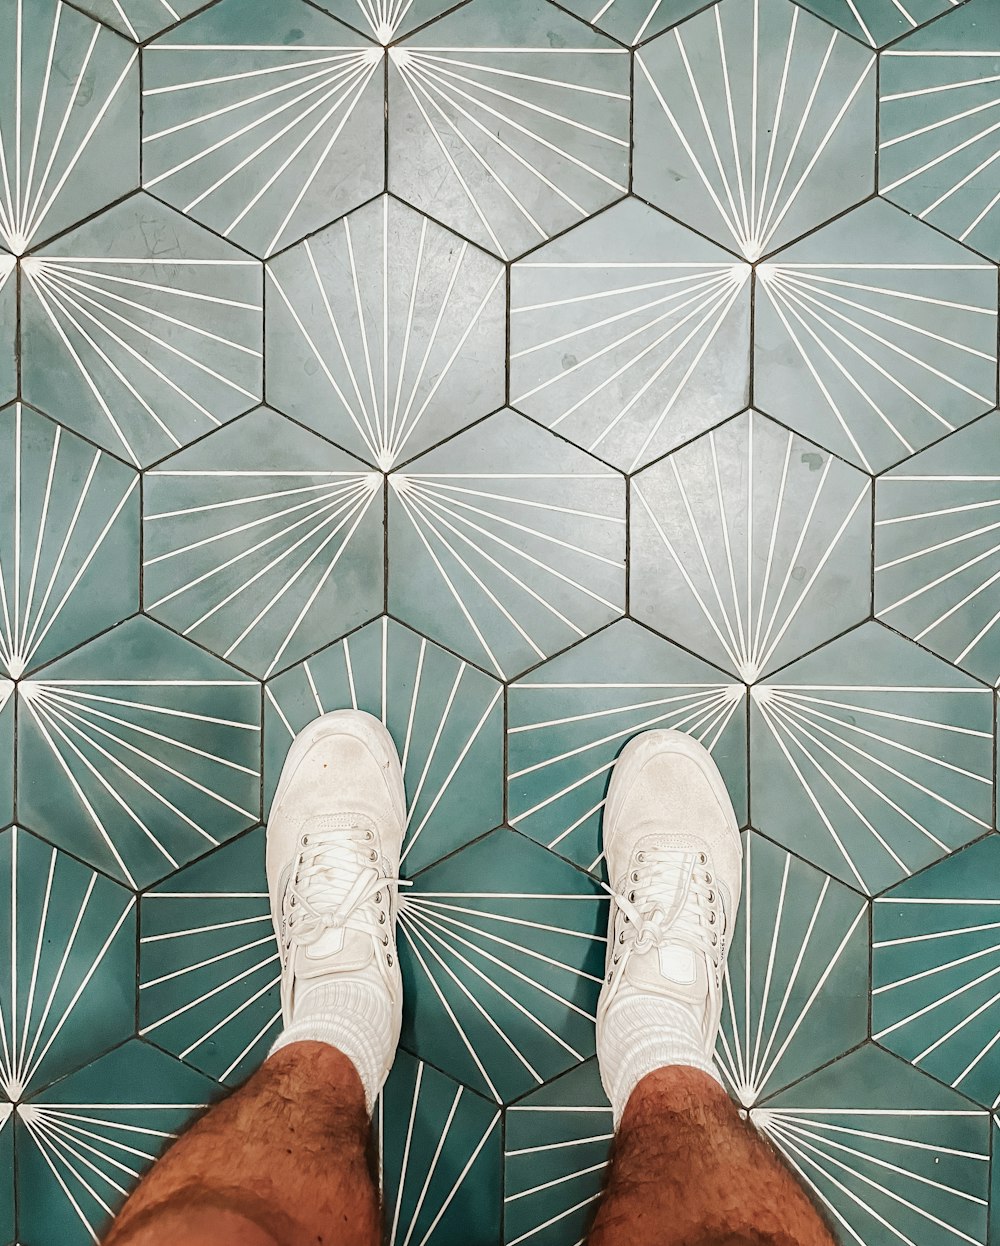 person wearing white shoes standing on white and brown floor tiles